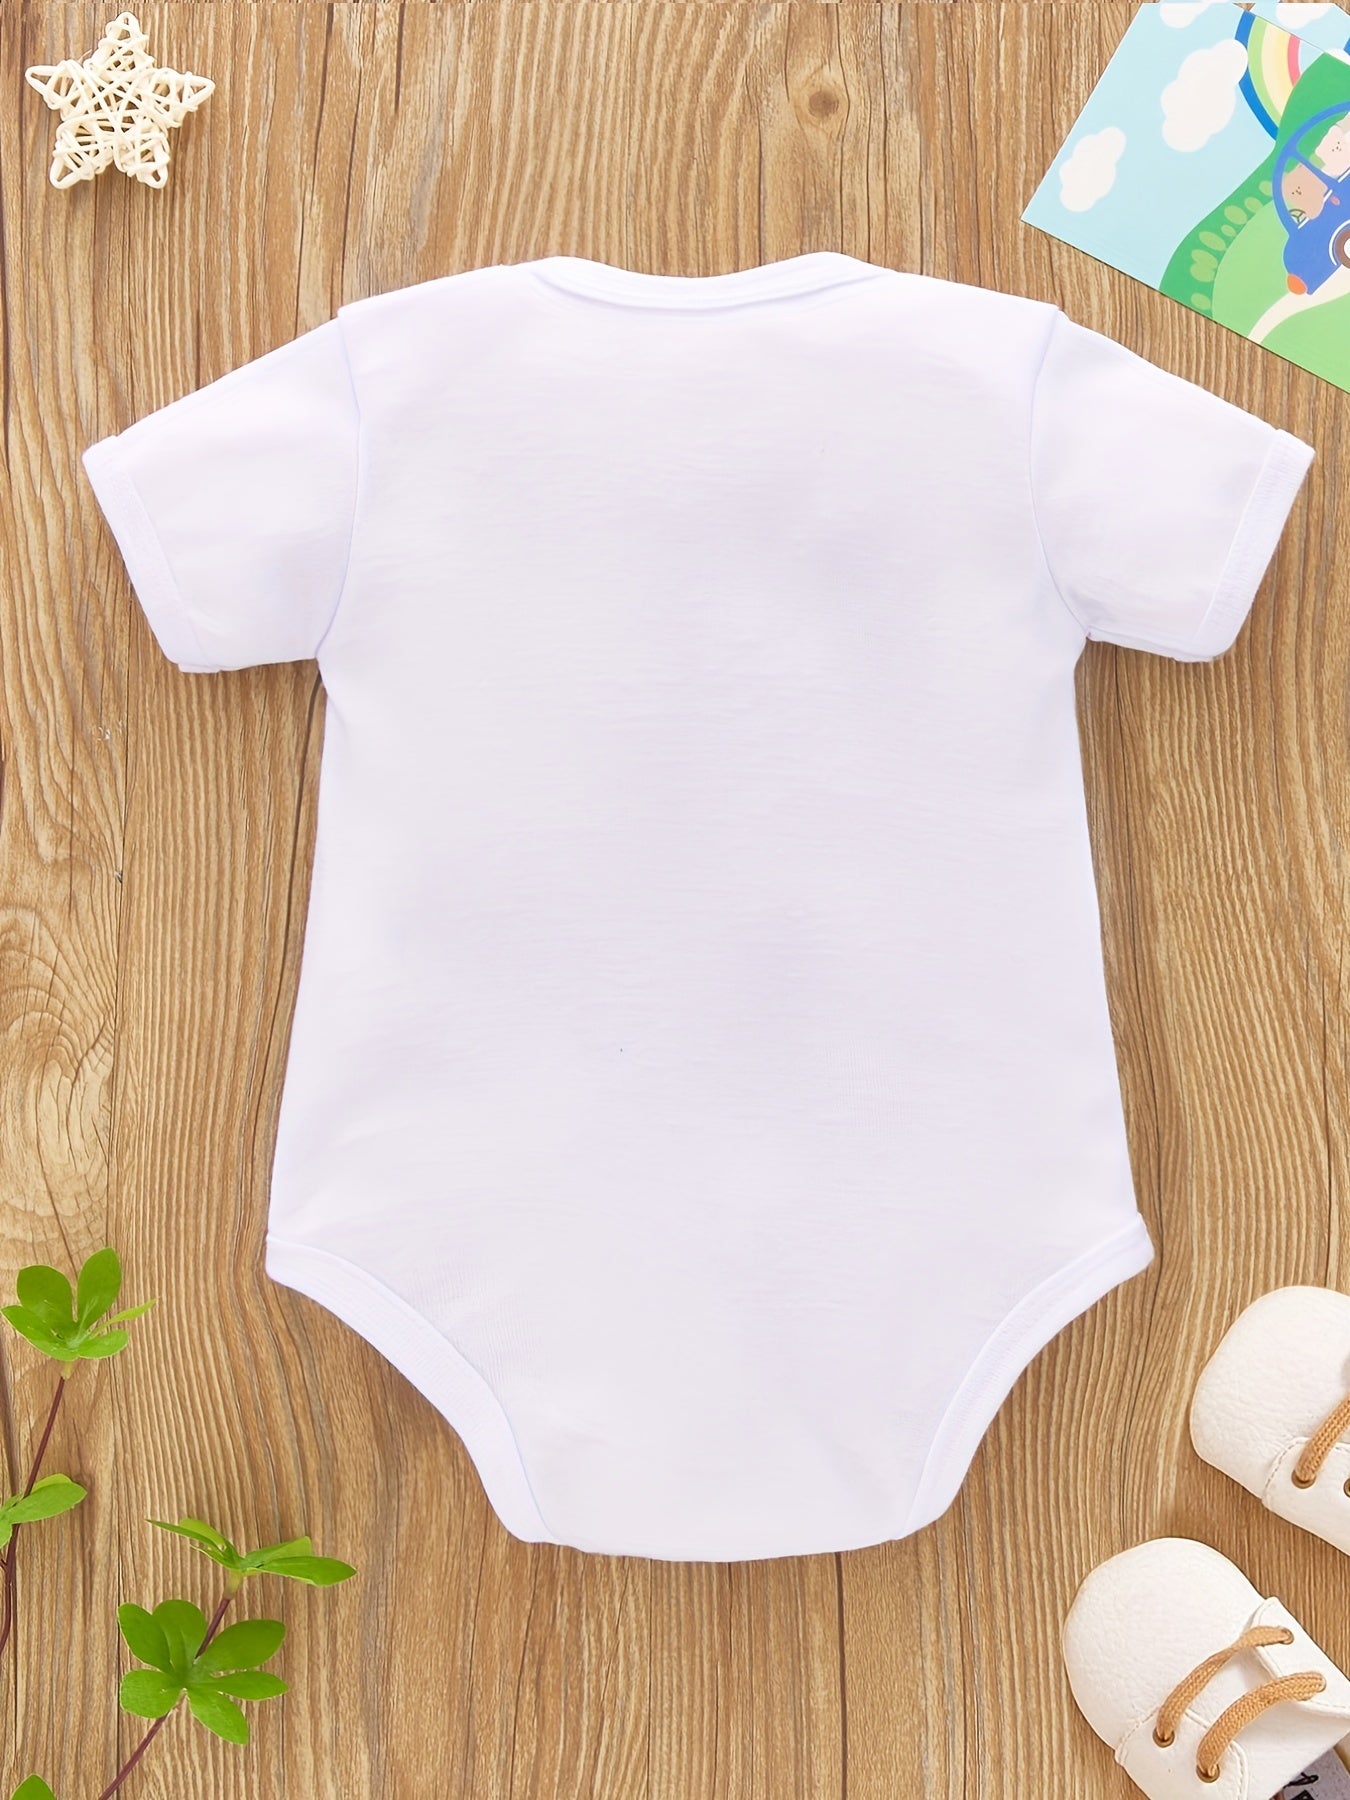 Newborn Infant Short Sleeve Romper Letter Graphic Crew Neck Bodysuit Onesies For Baby Boys And Girls Toddler Summer Clothes